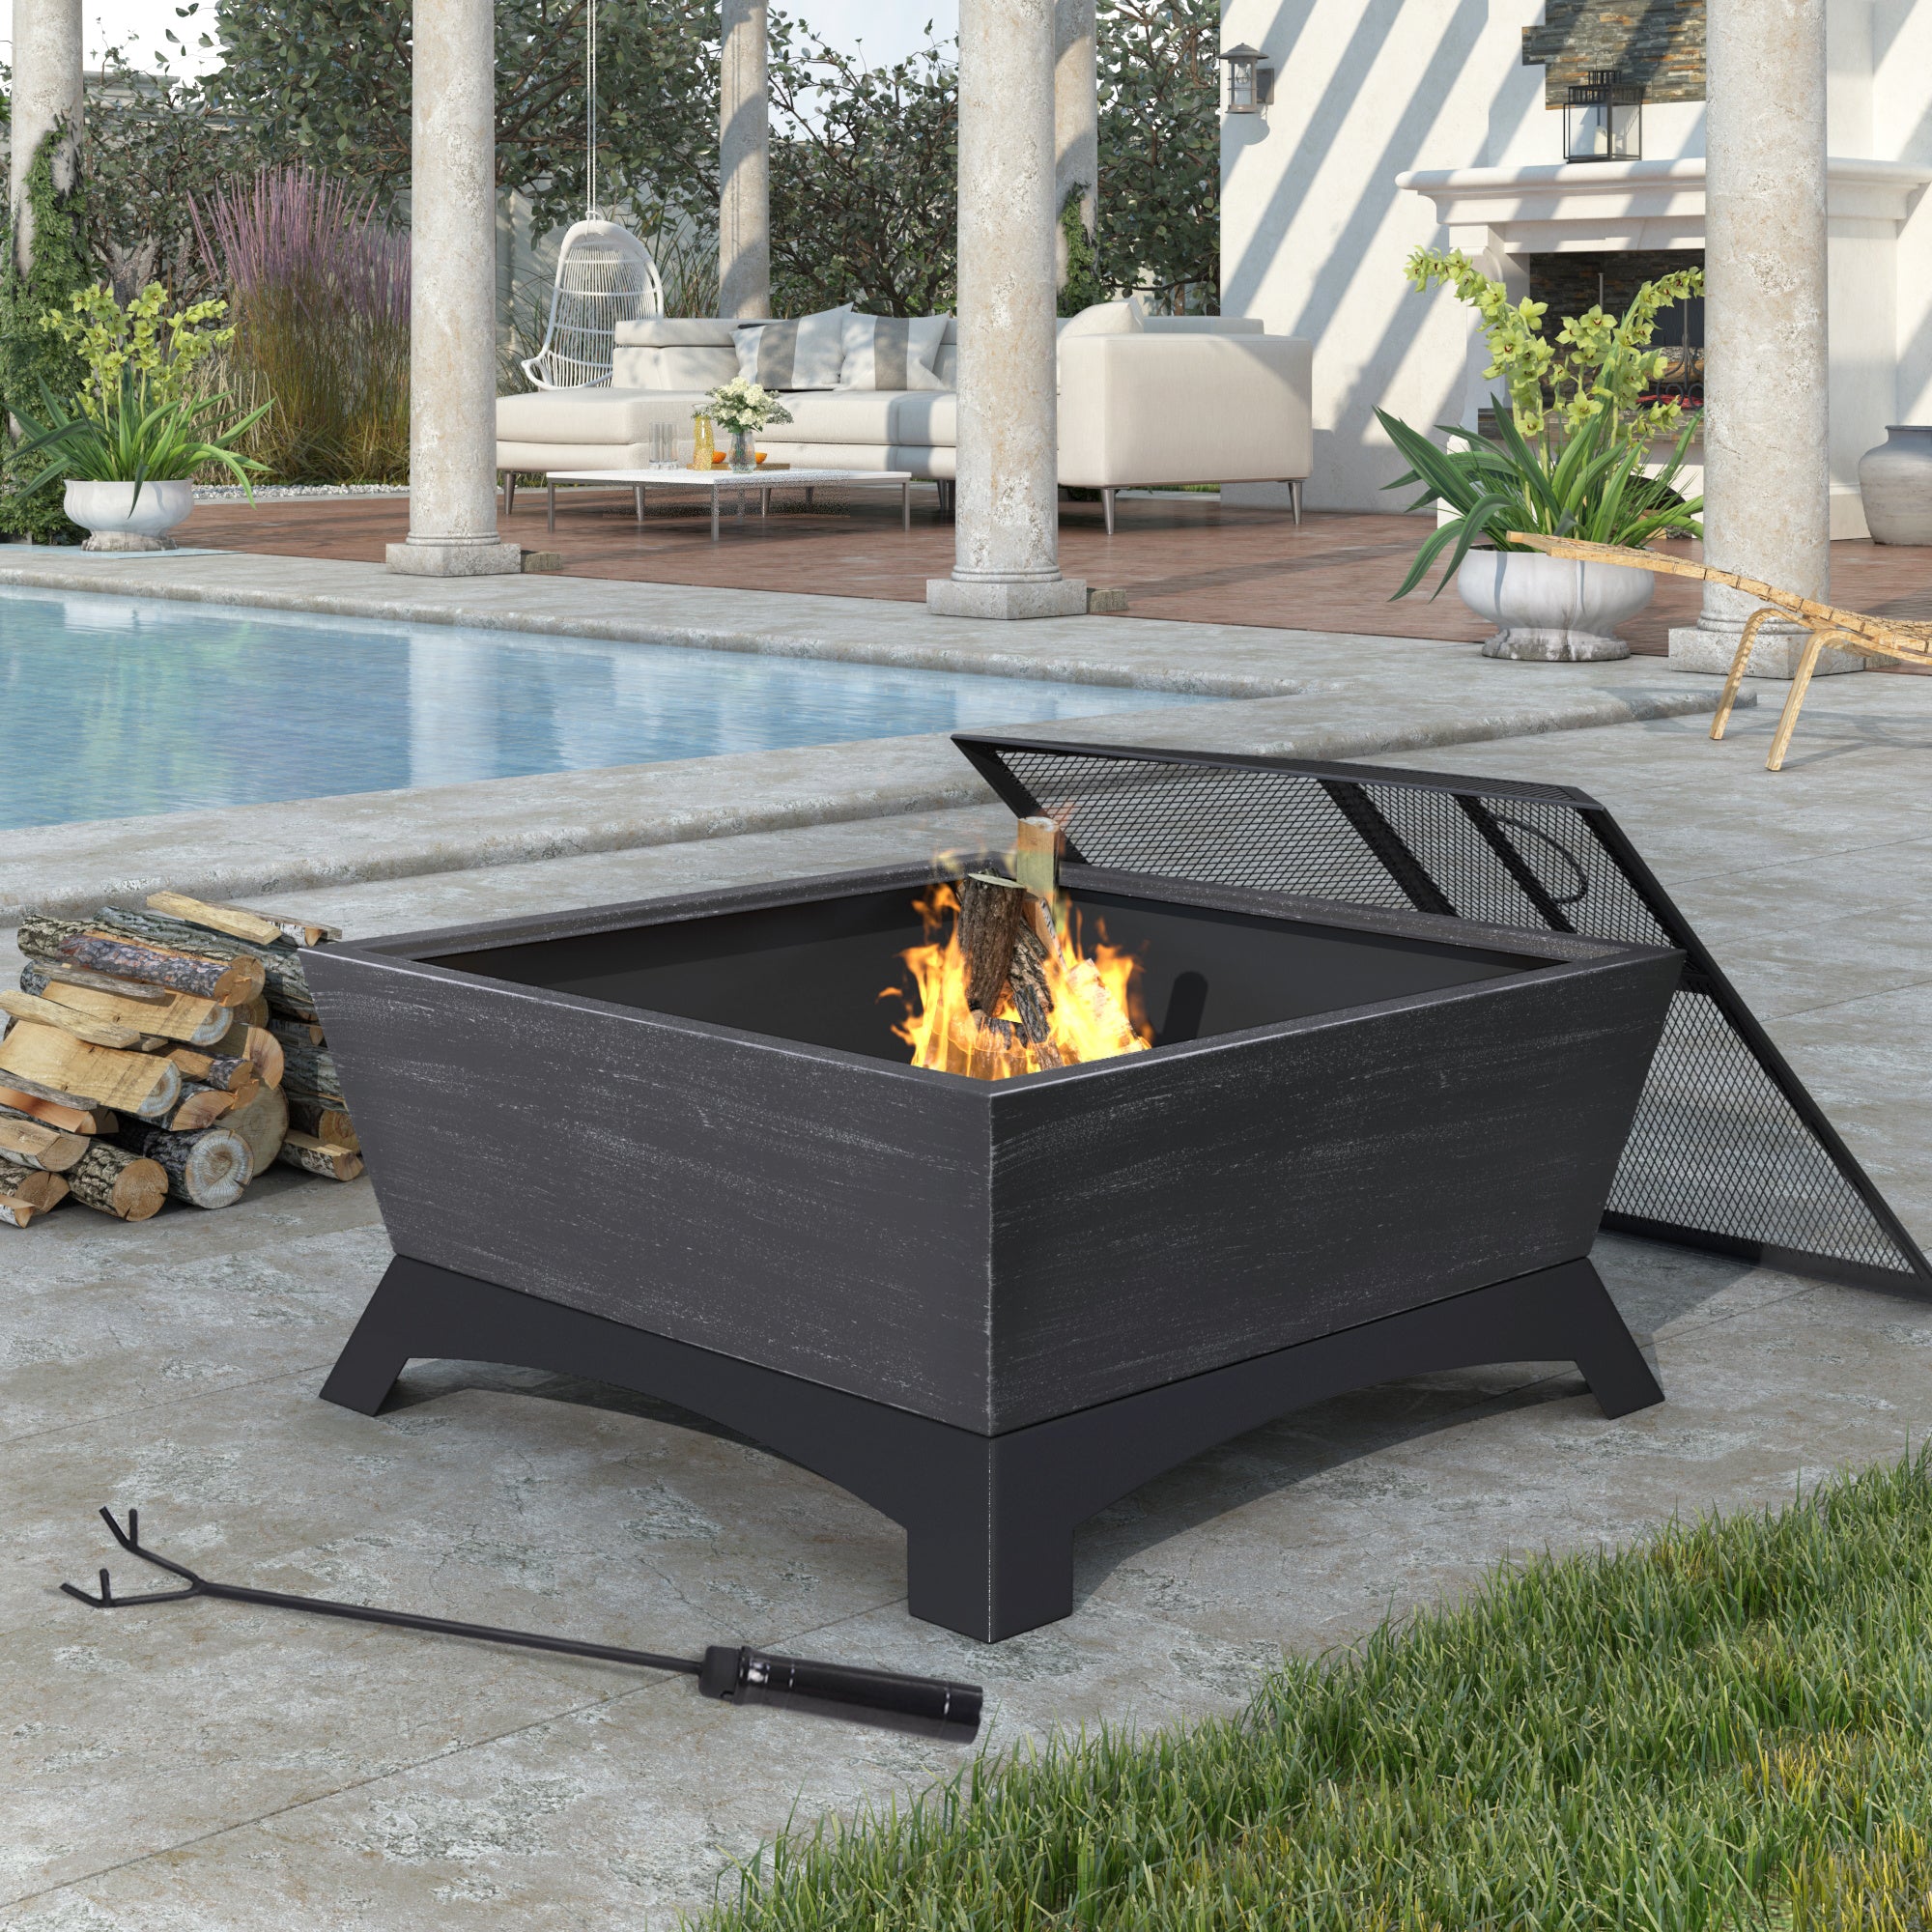 Free shipping Quality Steel Fire Pit with Log Poker, Mesh Screen for Outdoor Living, Family Use, Dark Gray